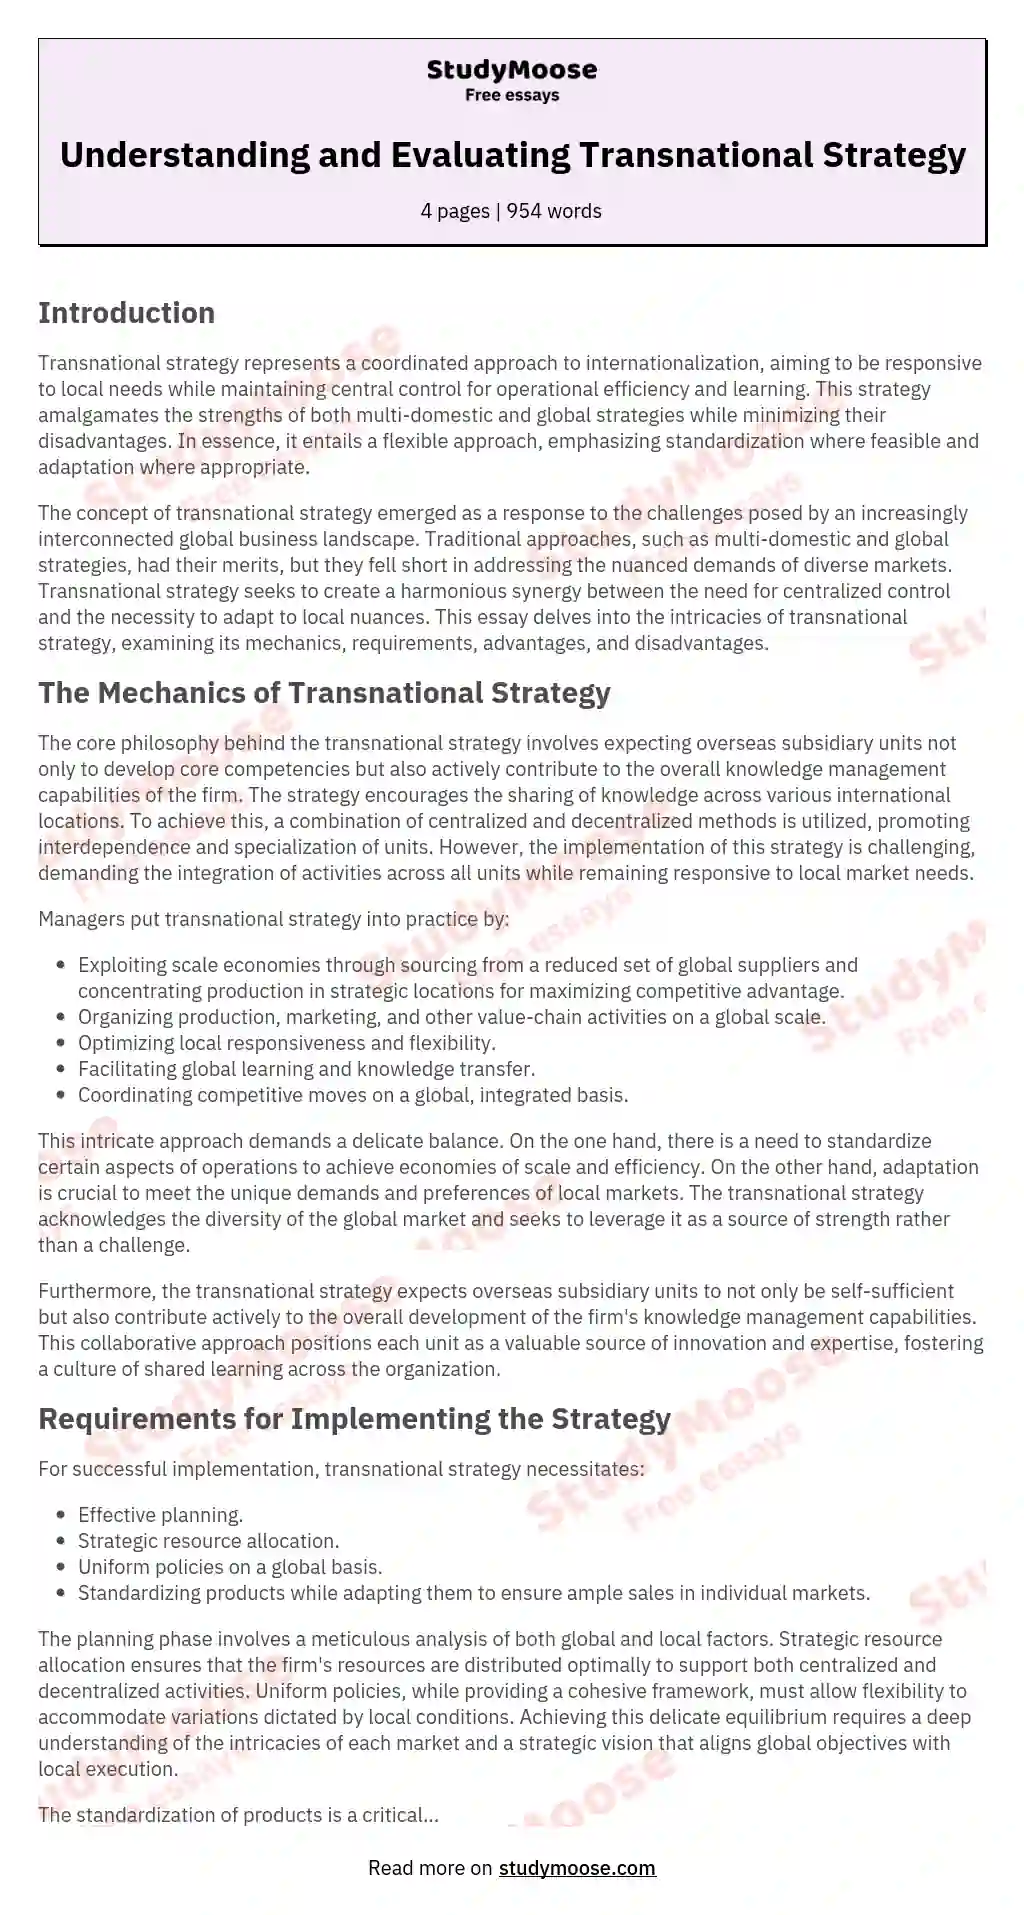 Understanding and Evaluating Transnational Strategy essay